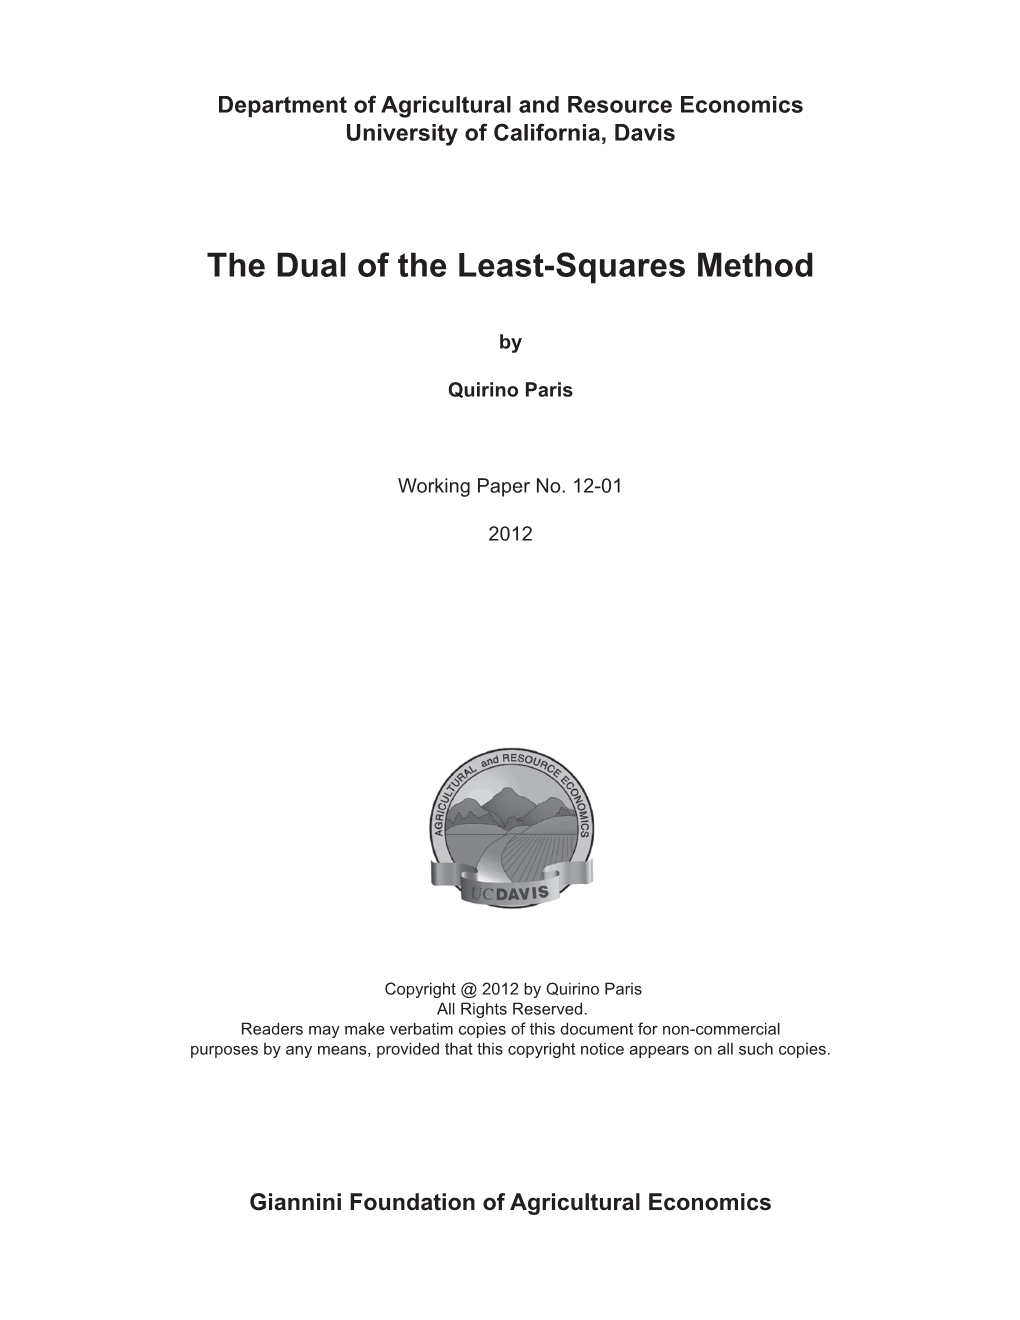 The Dual of the Least-Squares Method